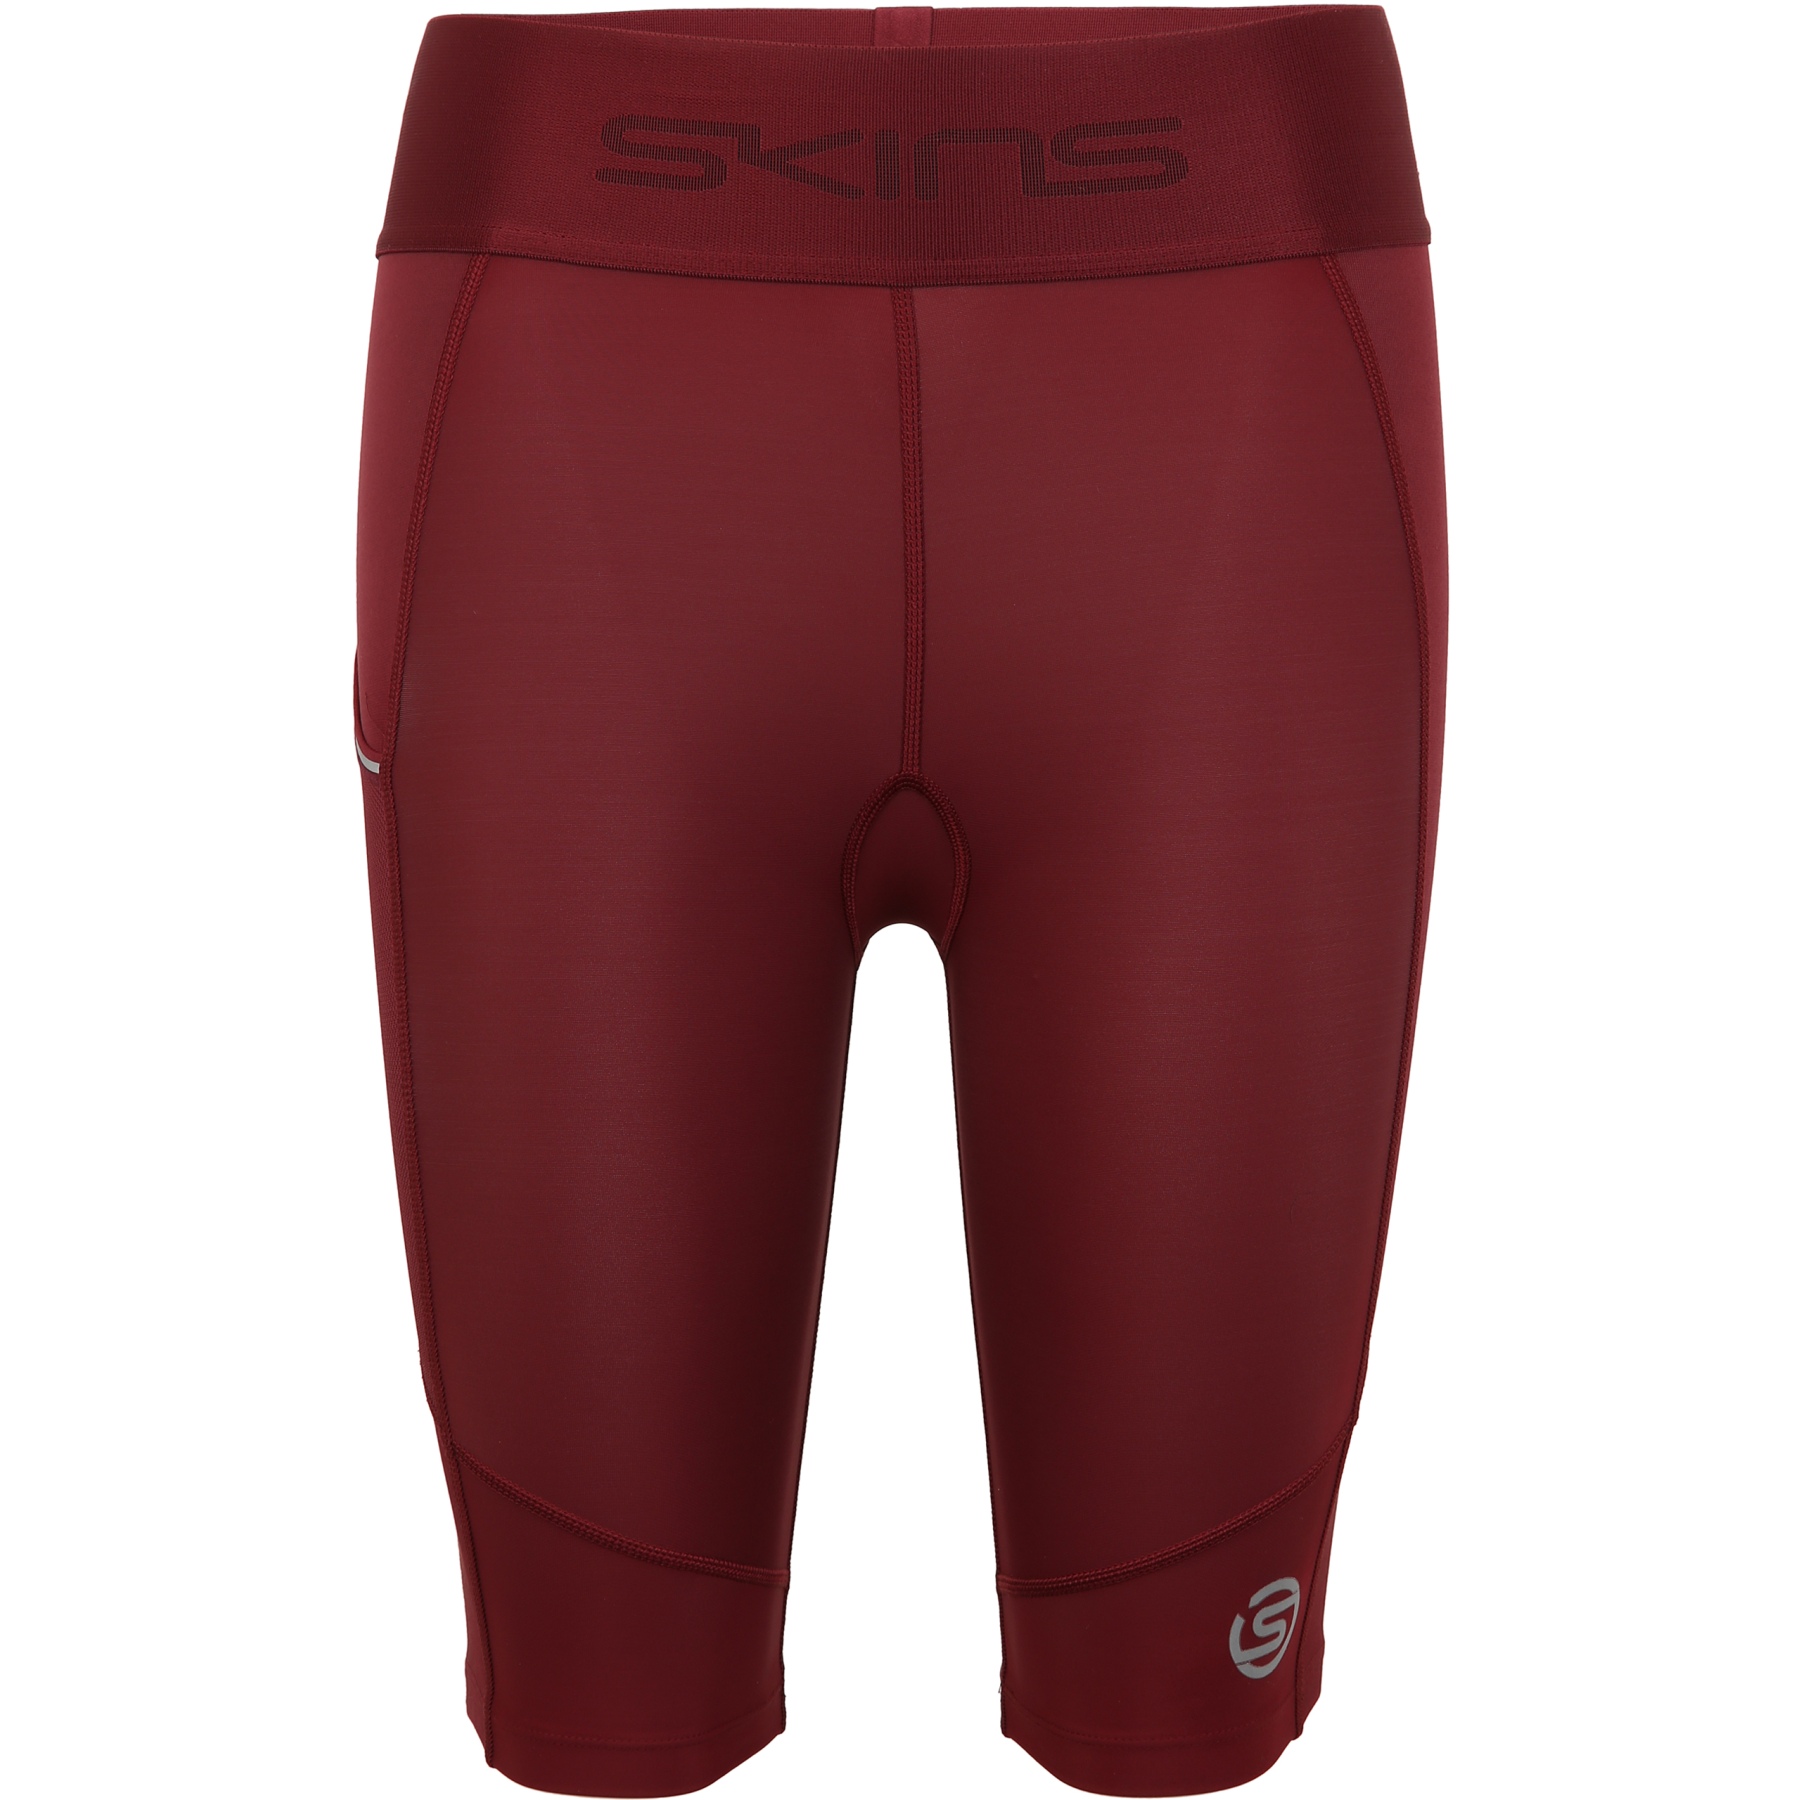 Picture of SKINS Compression 3-Series Half Tights Women - Burgundy